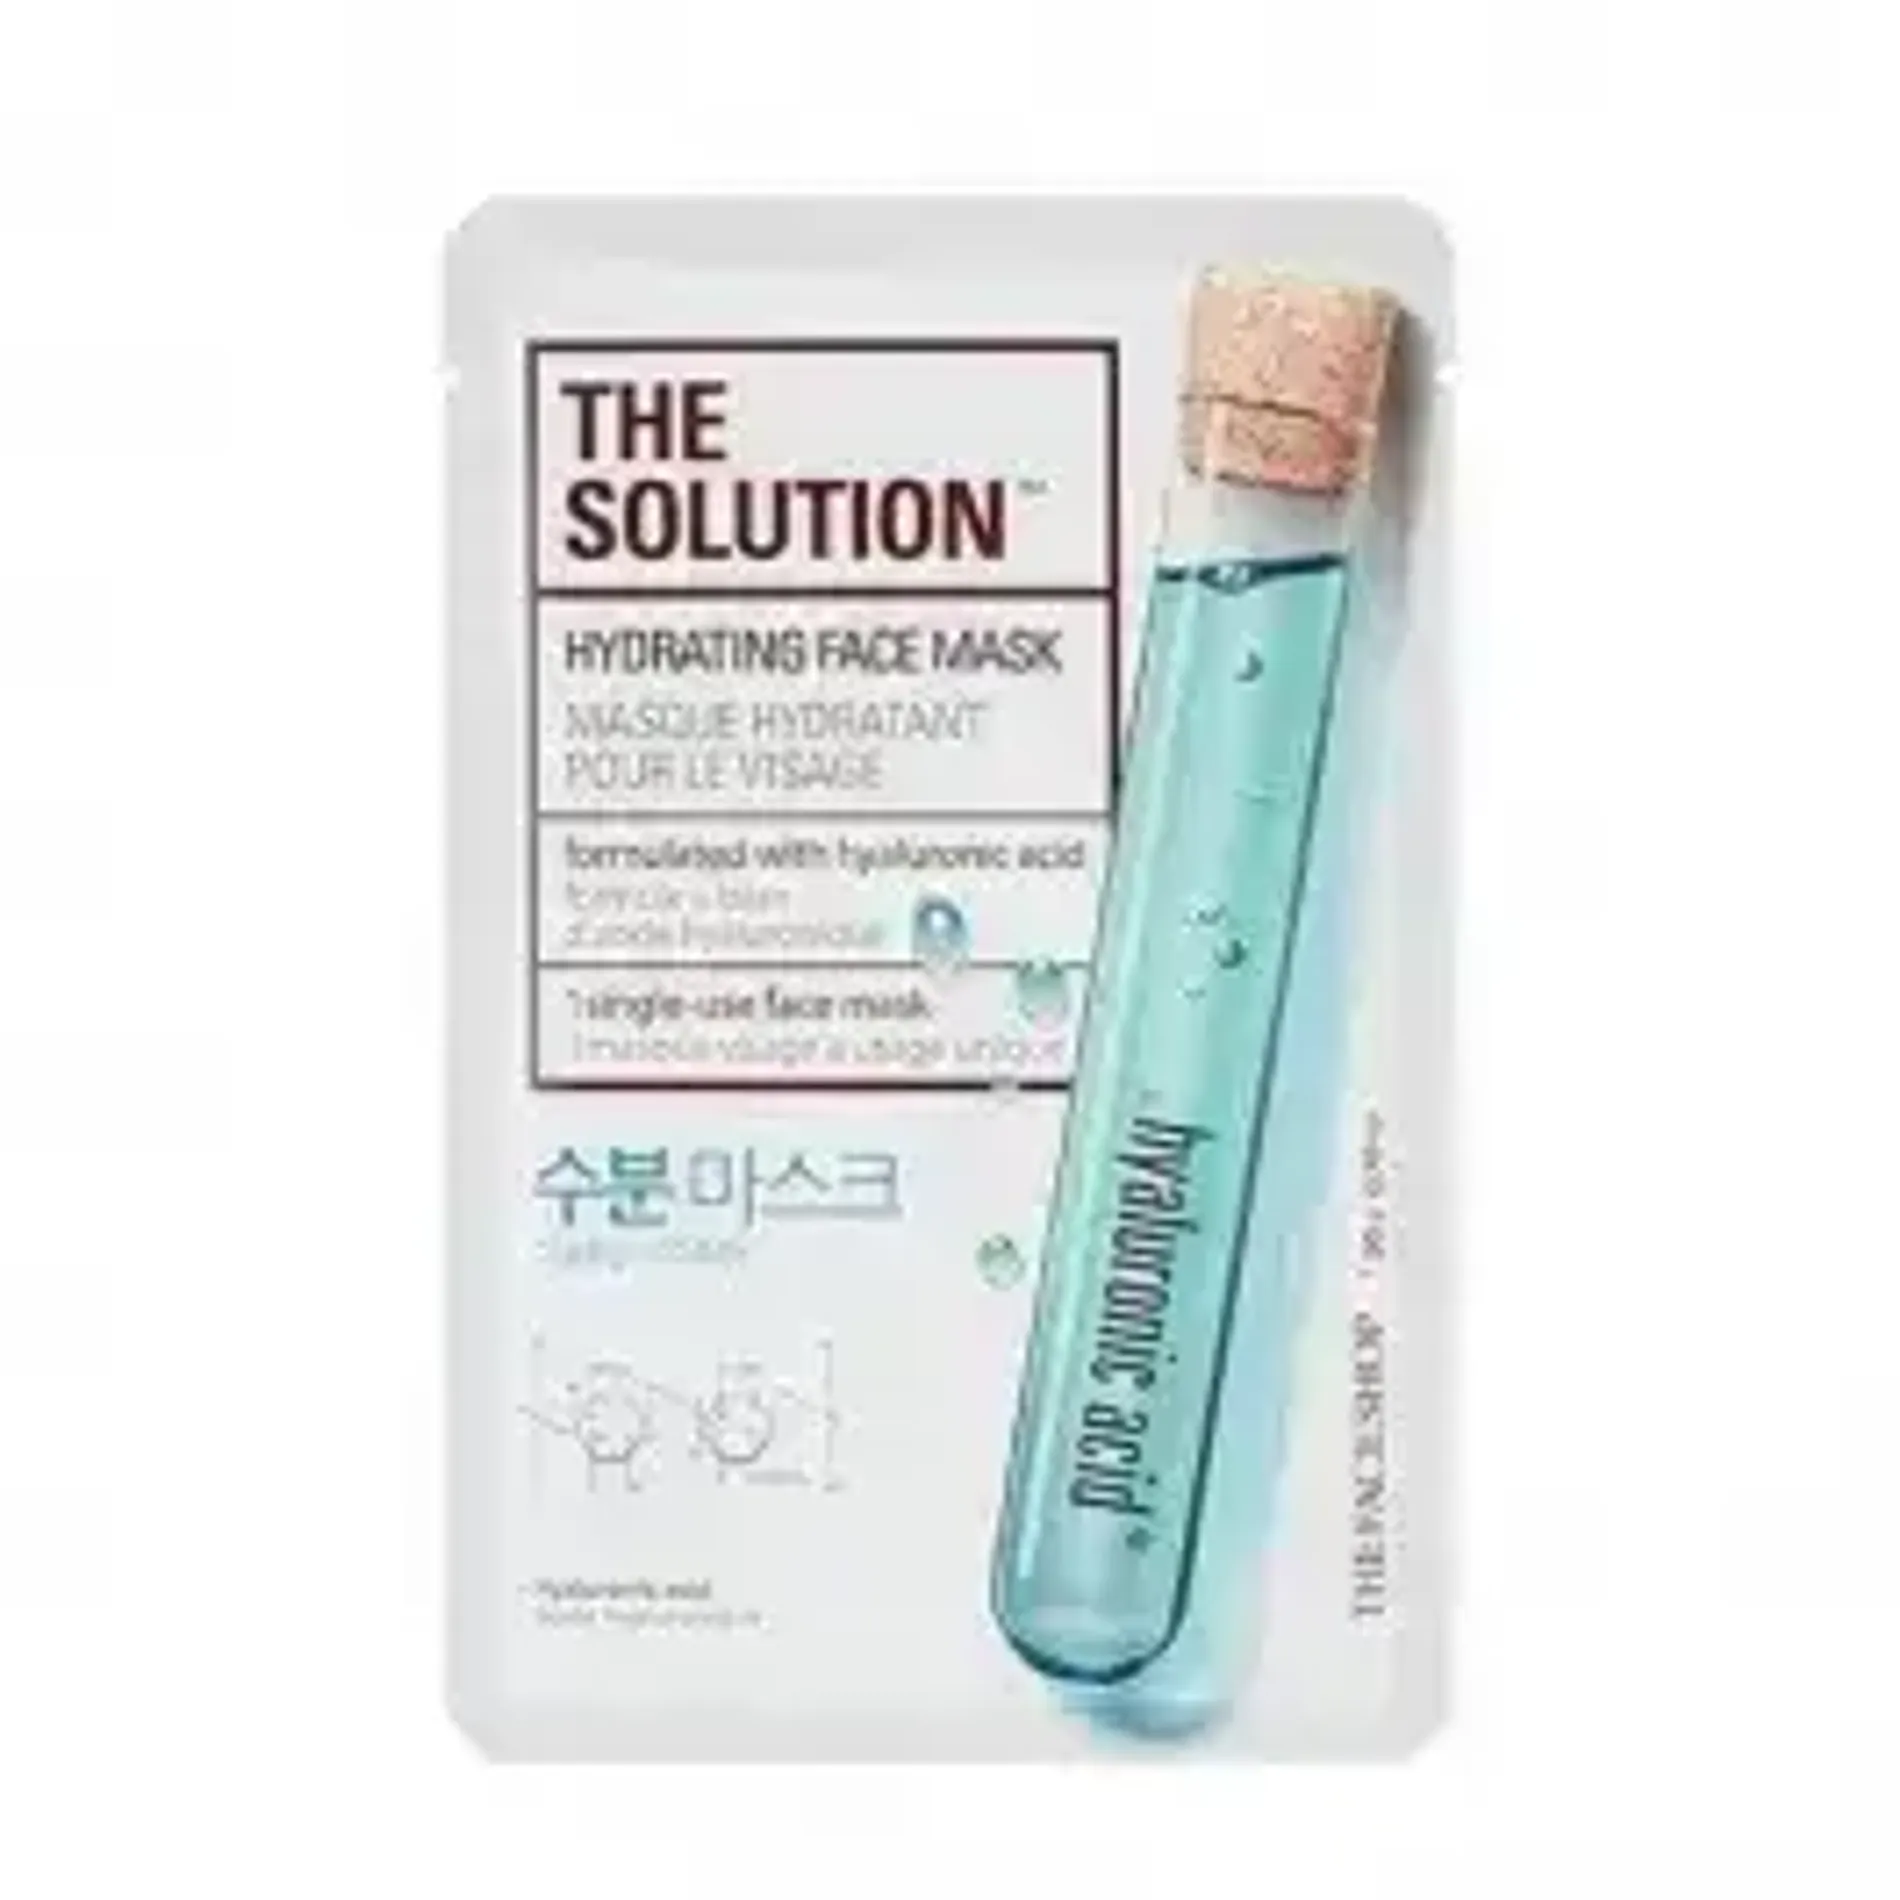 mat-na-cung-cap-am-the-solution-hydrating-face-mask-1